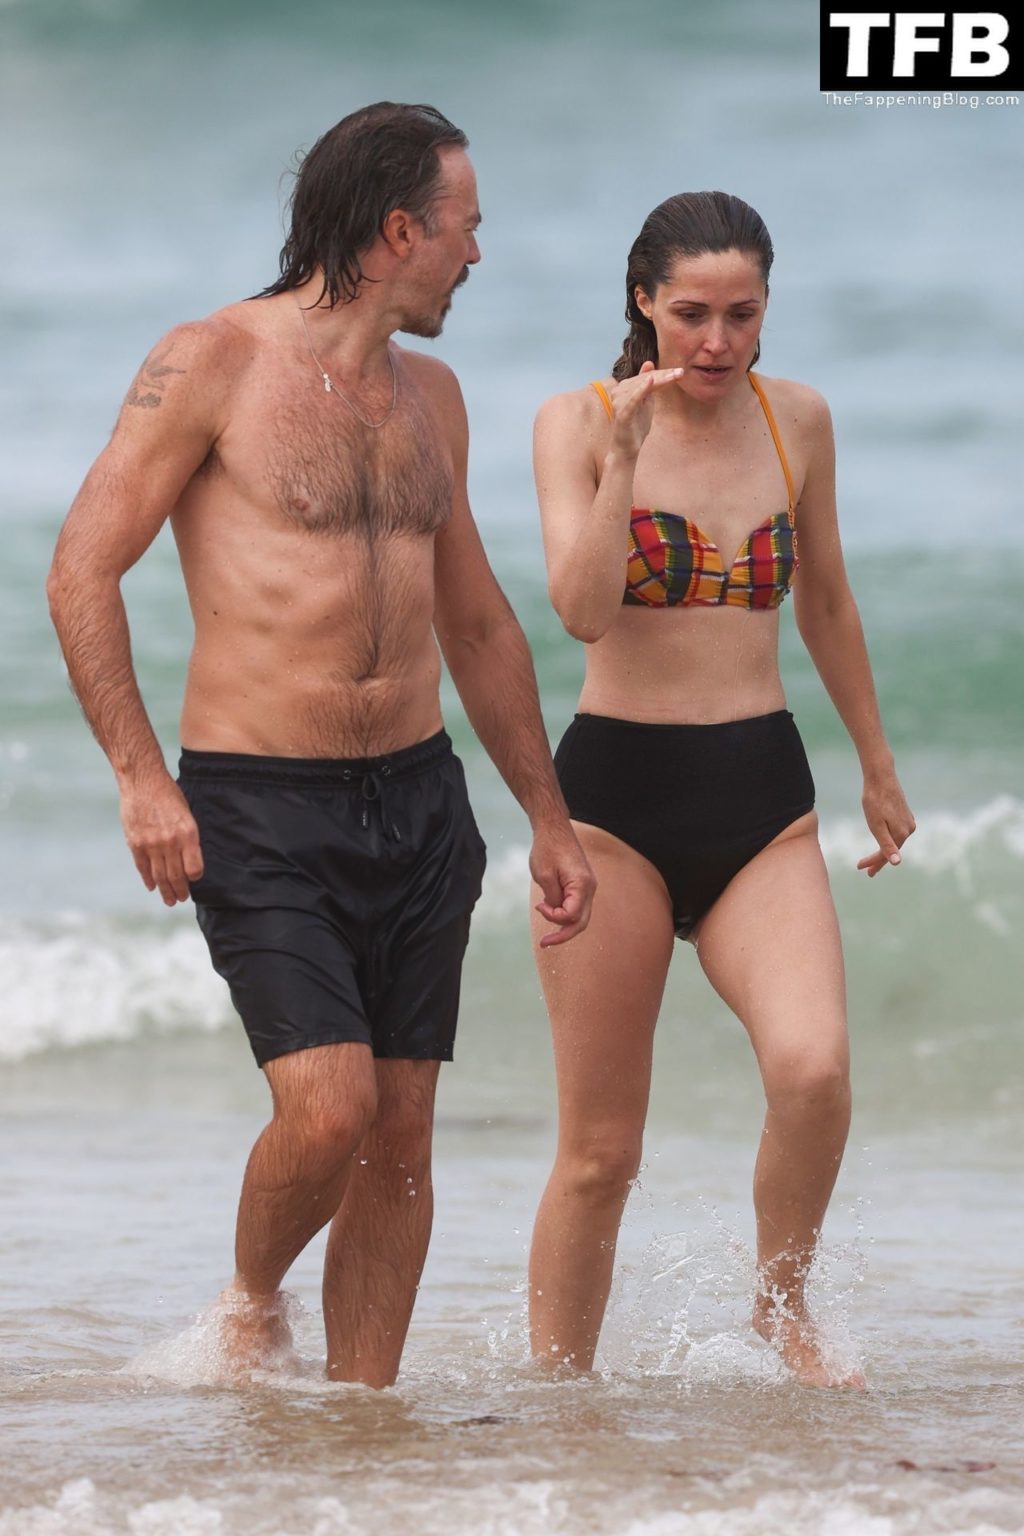 Rose Byrne Sexy The Fappening Blog 26 1024x1536 - Rose Byrne & Kick Gurry Enjoy a Day on the Beach in Sydney (90 Photos)